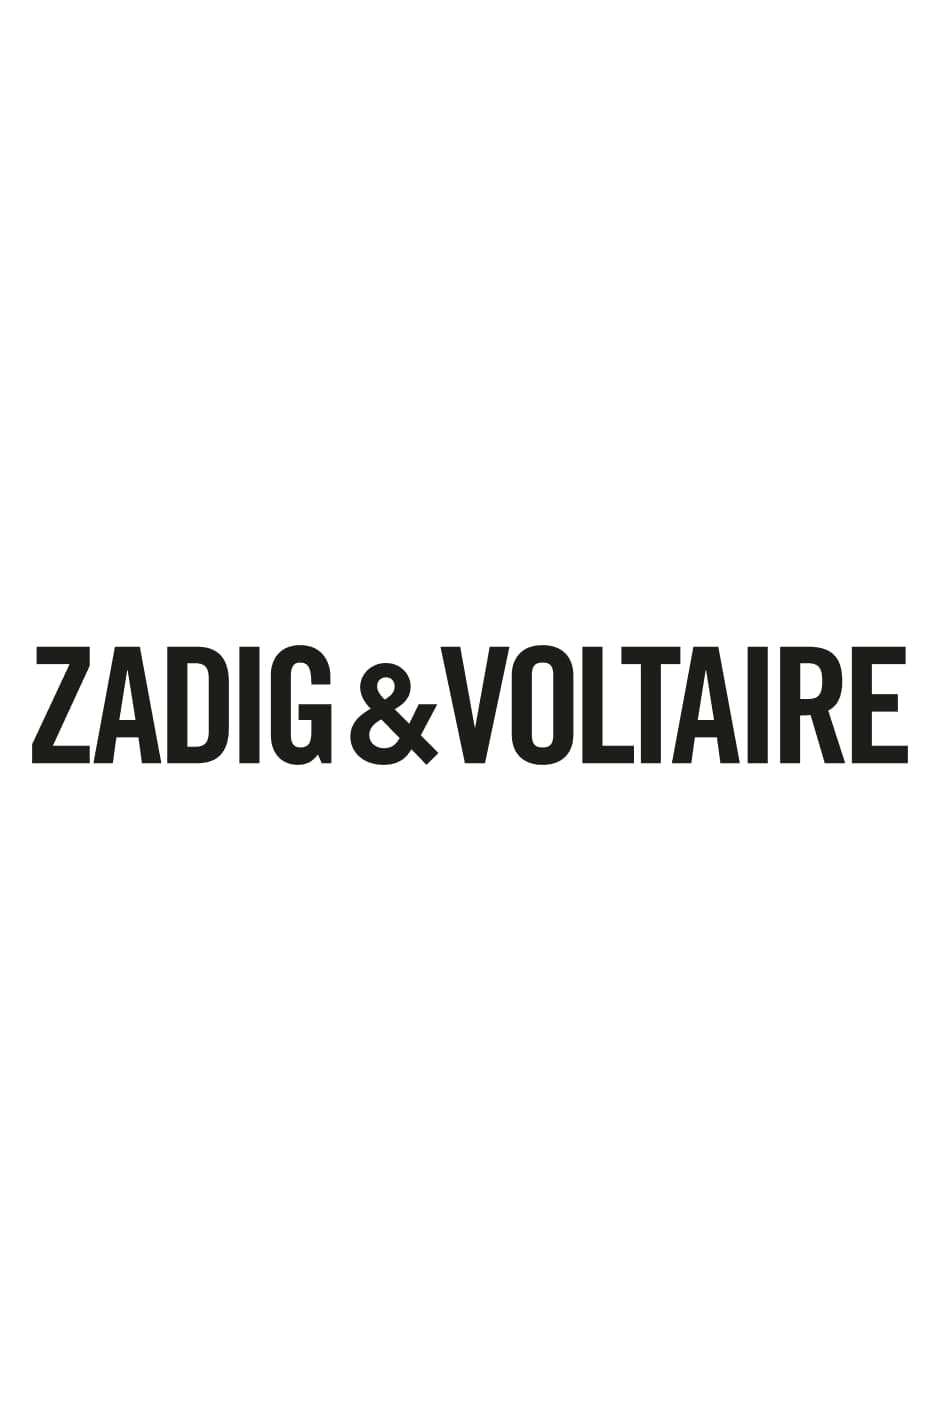 Women’s chic and trendy coats and blazers | Zadig&Voltaire